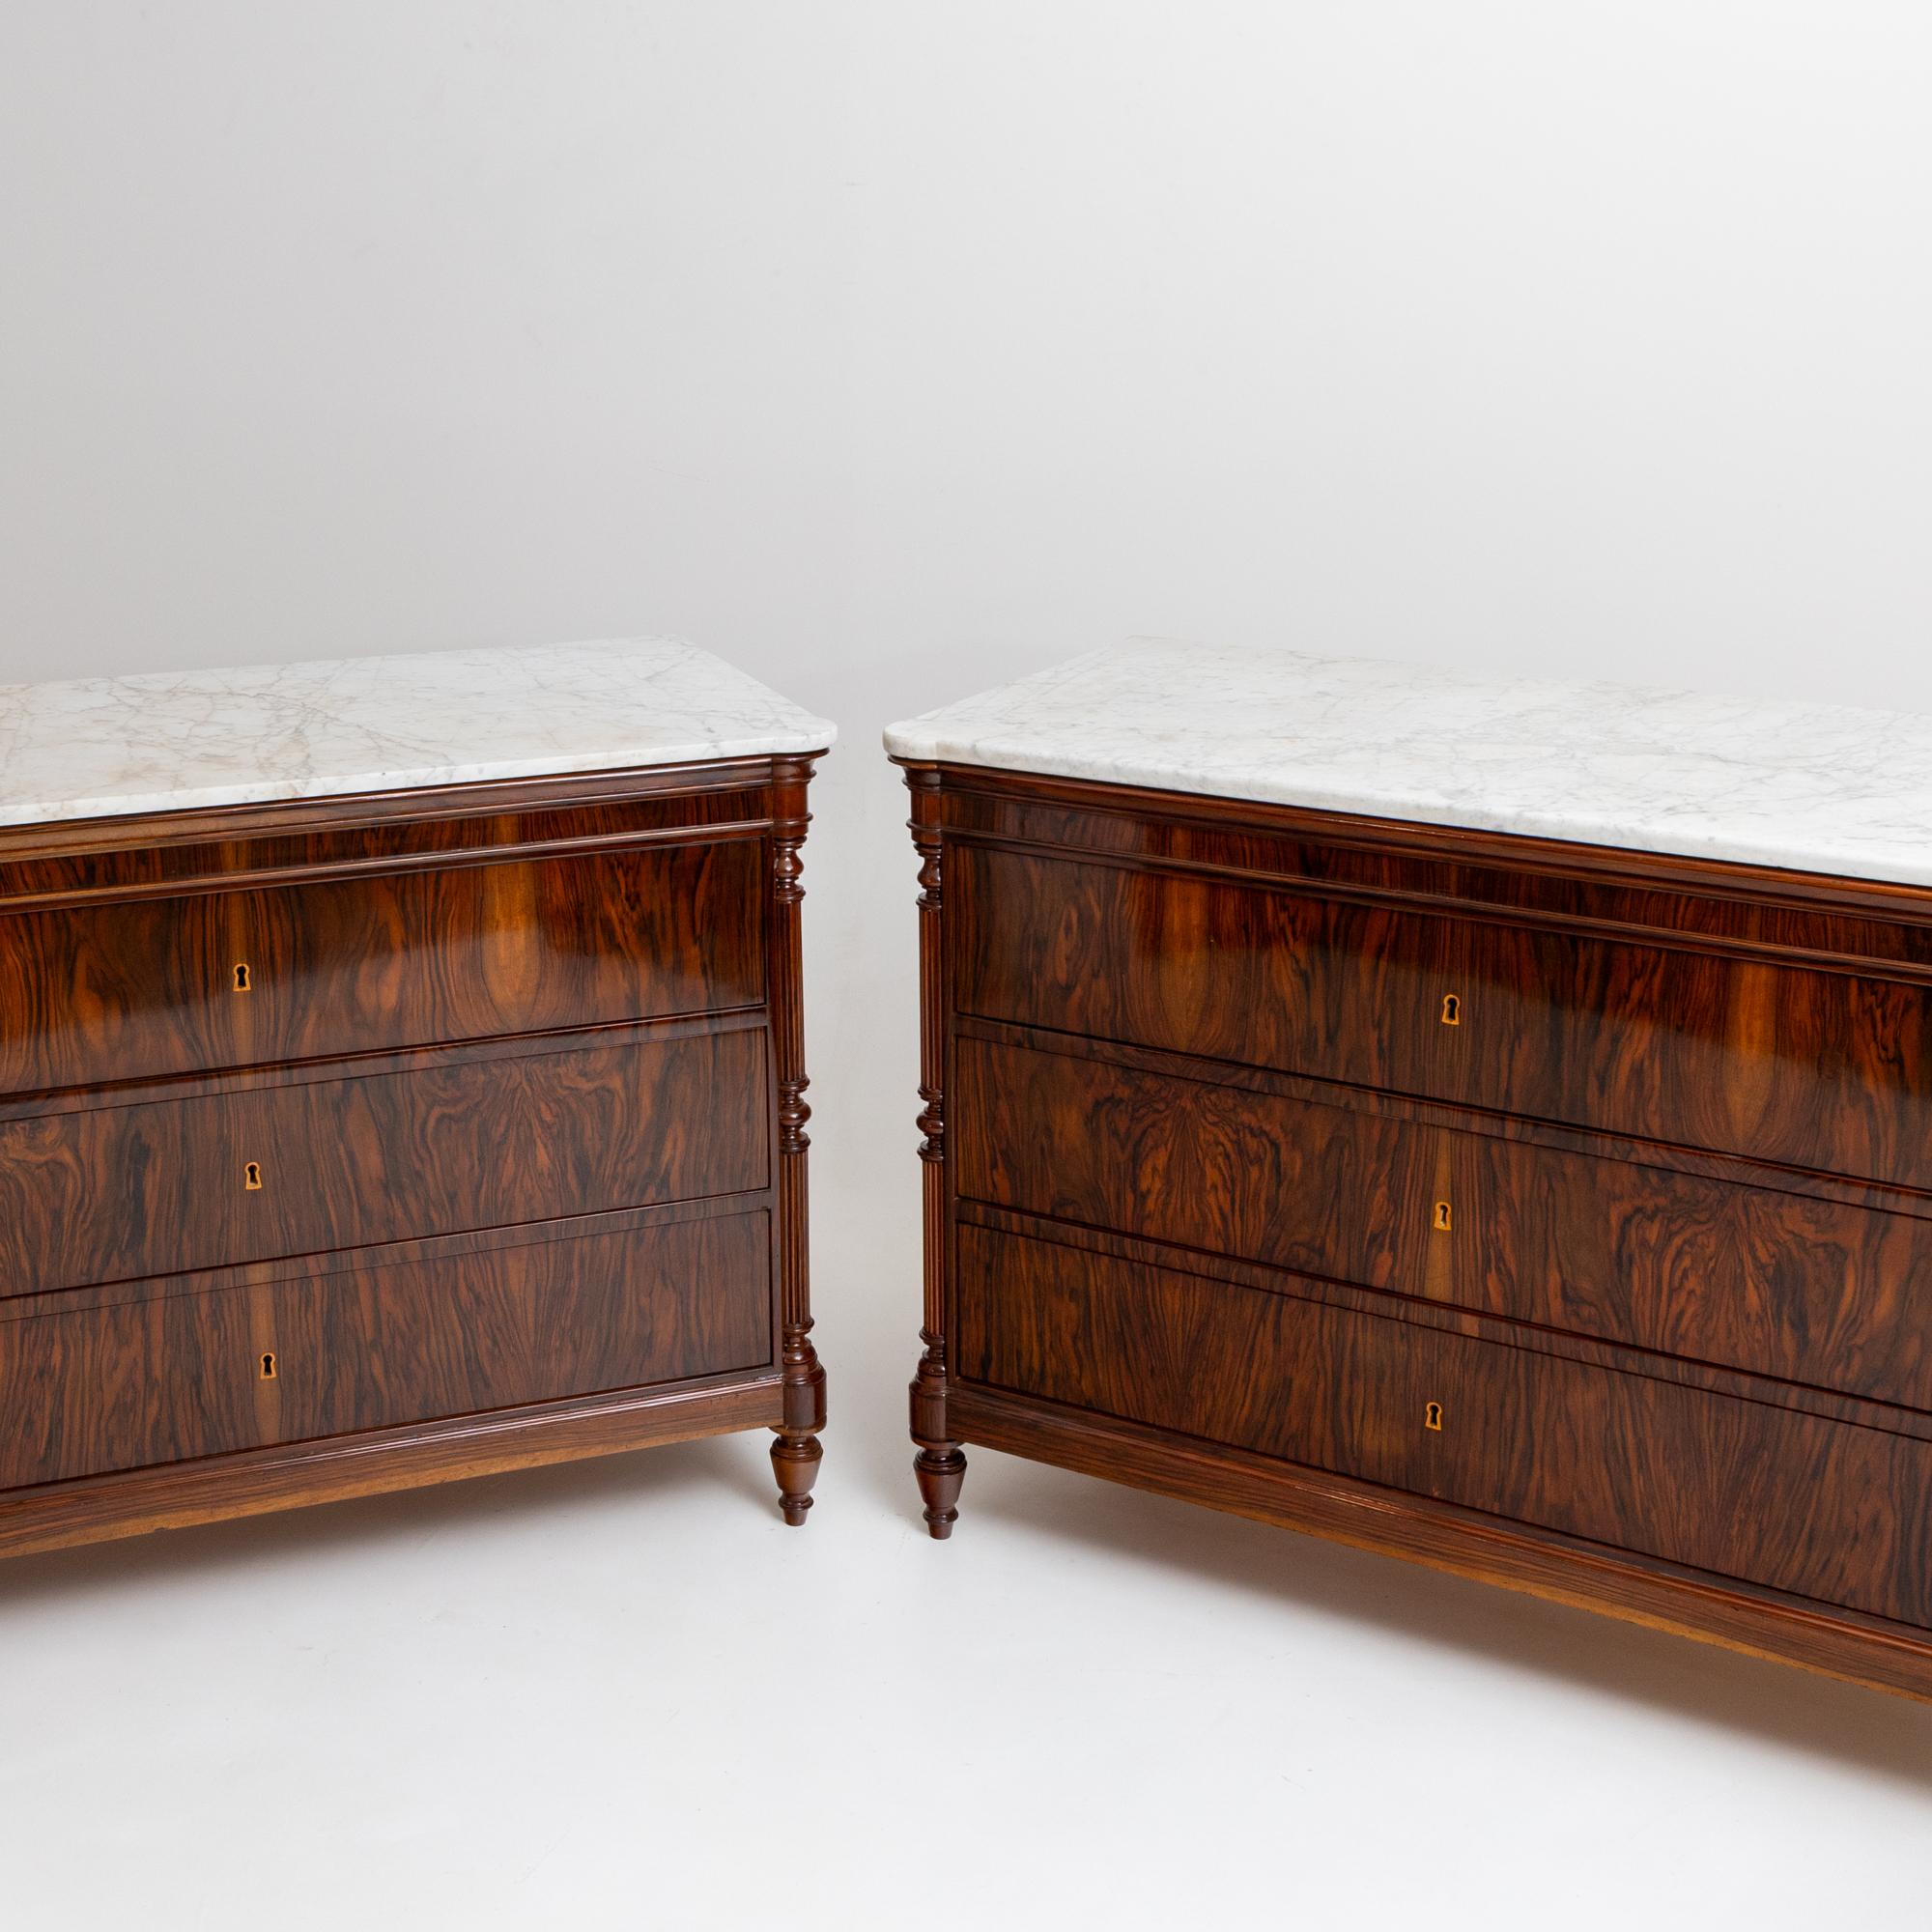 Polished Pair of Chests of Drawers with Marble Tops, Mid-19th Century For Sale